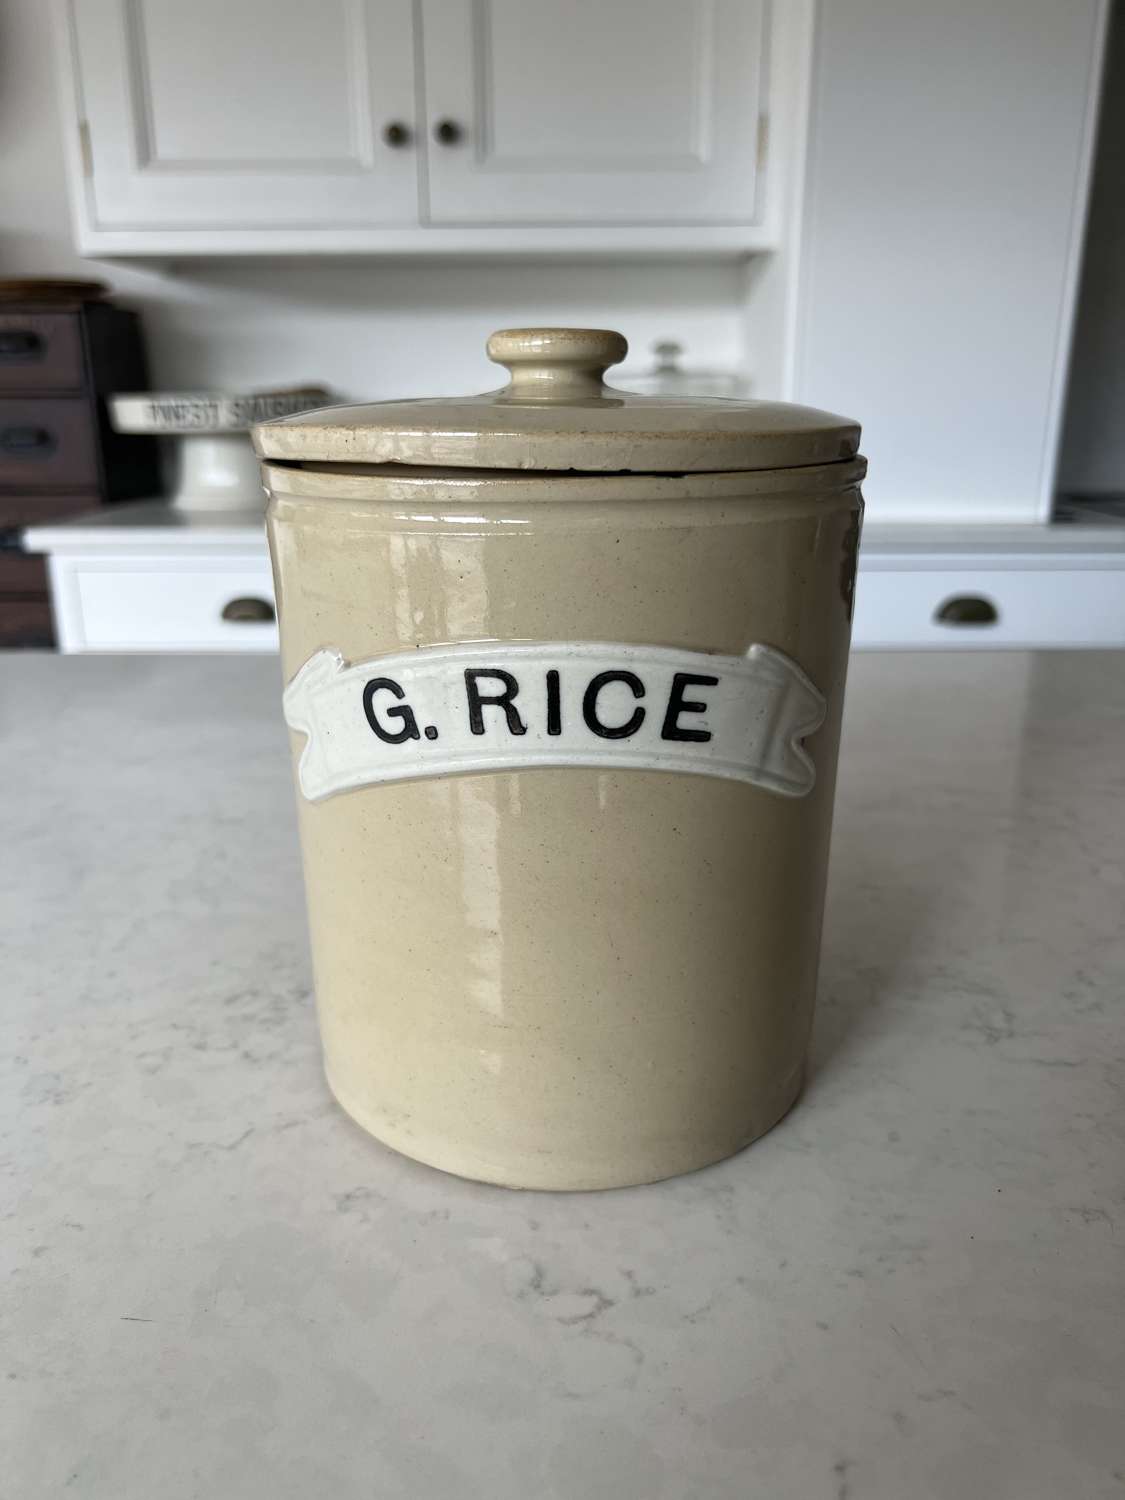 Late Victorian Large Stoneware Kitchen Jar with Orig Lid - G.RICE